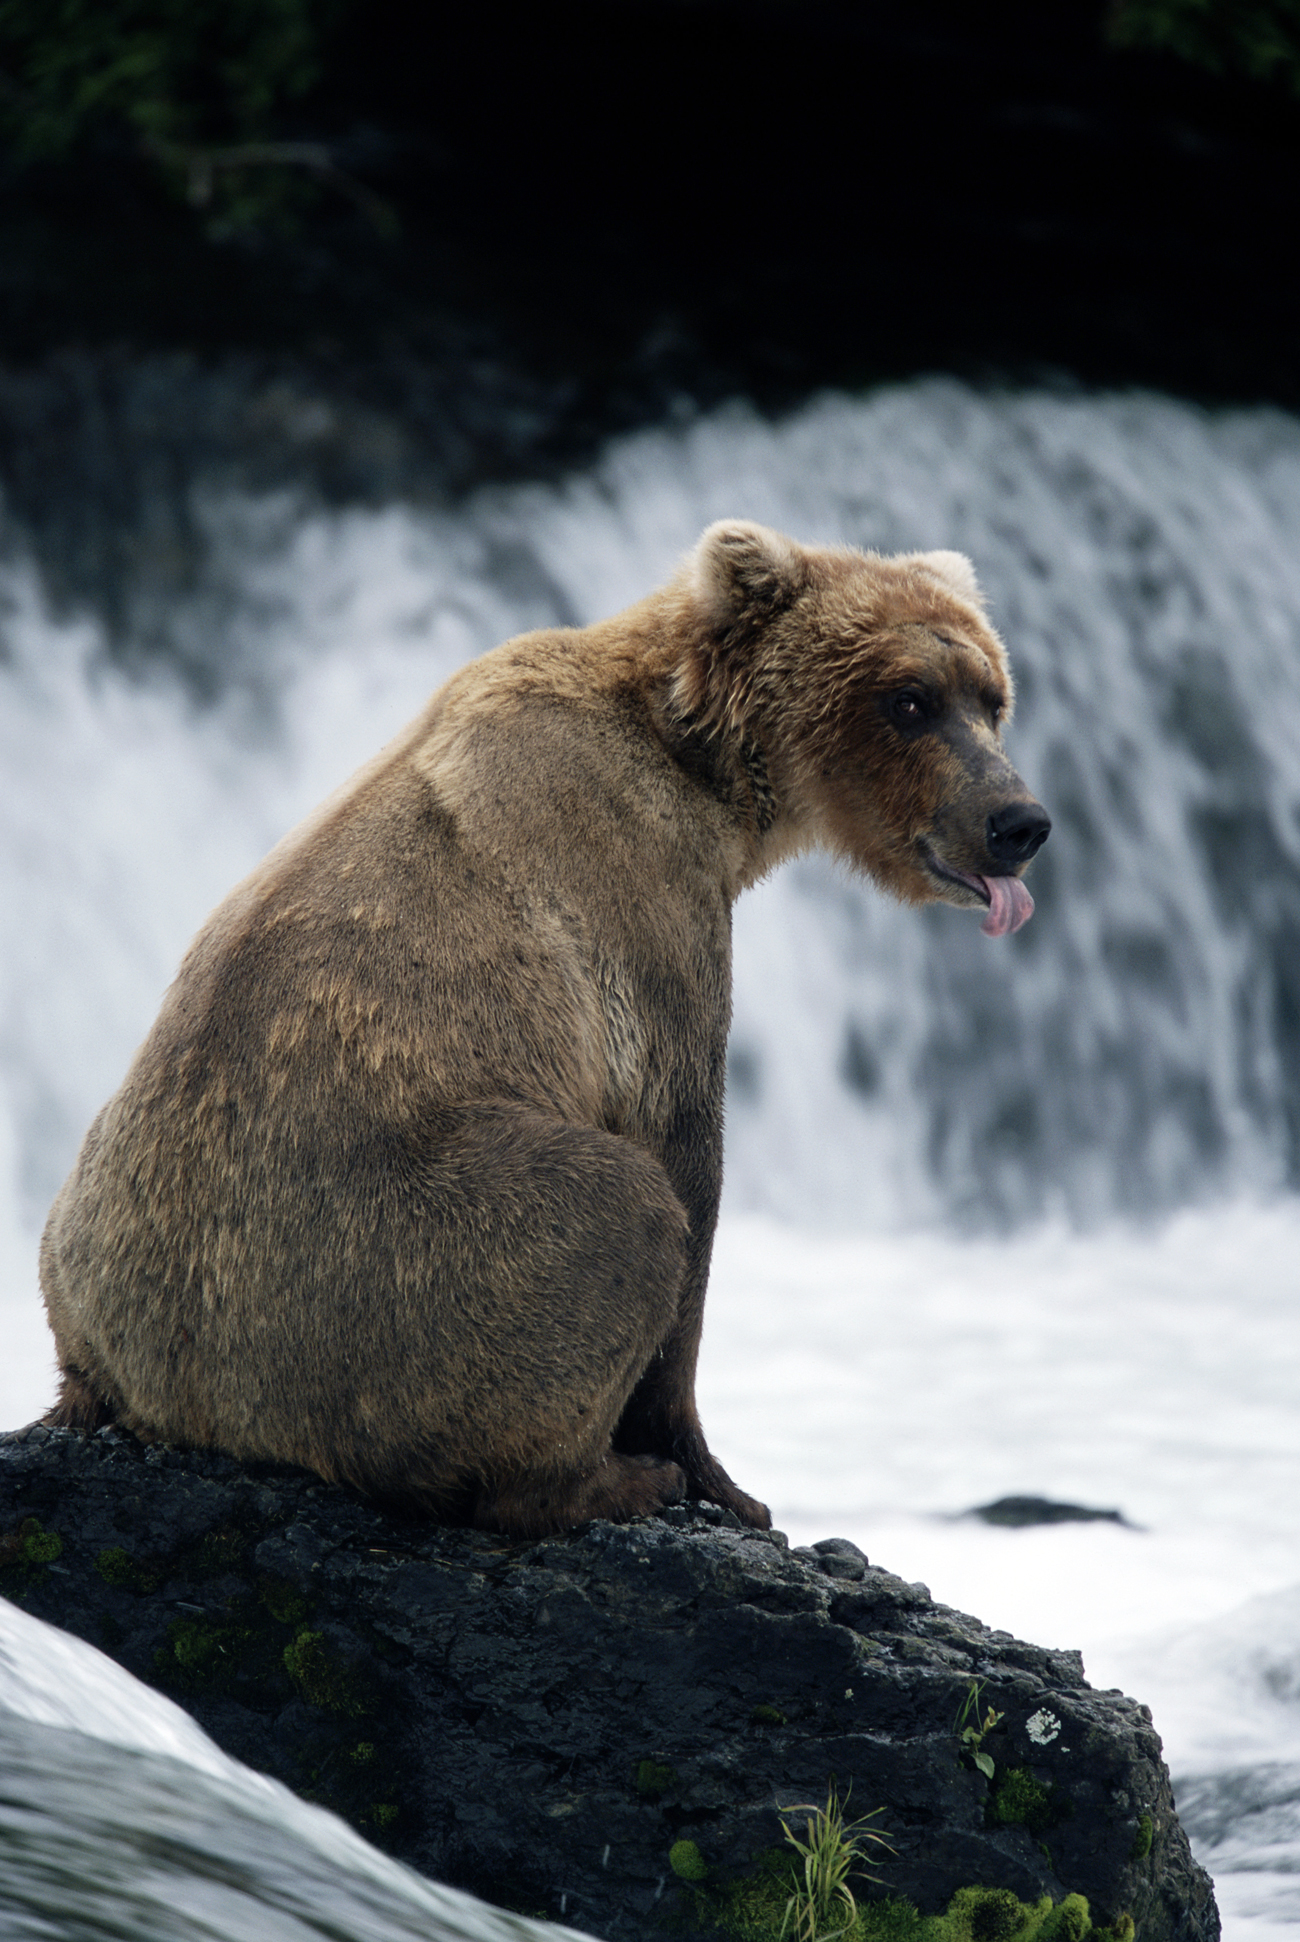 Grizzly bear / Source: Getty Images